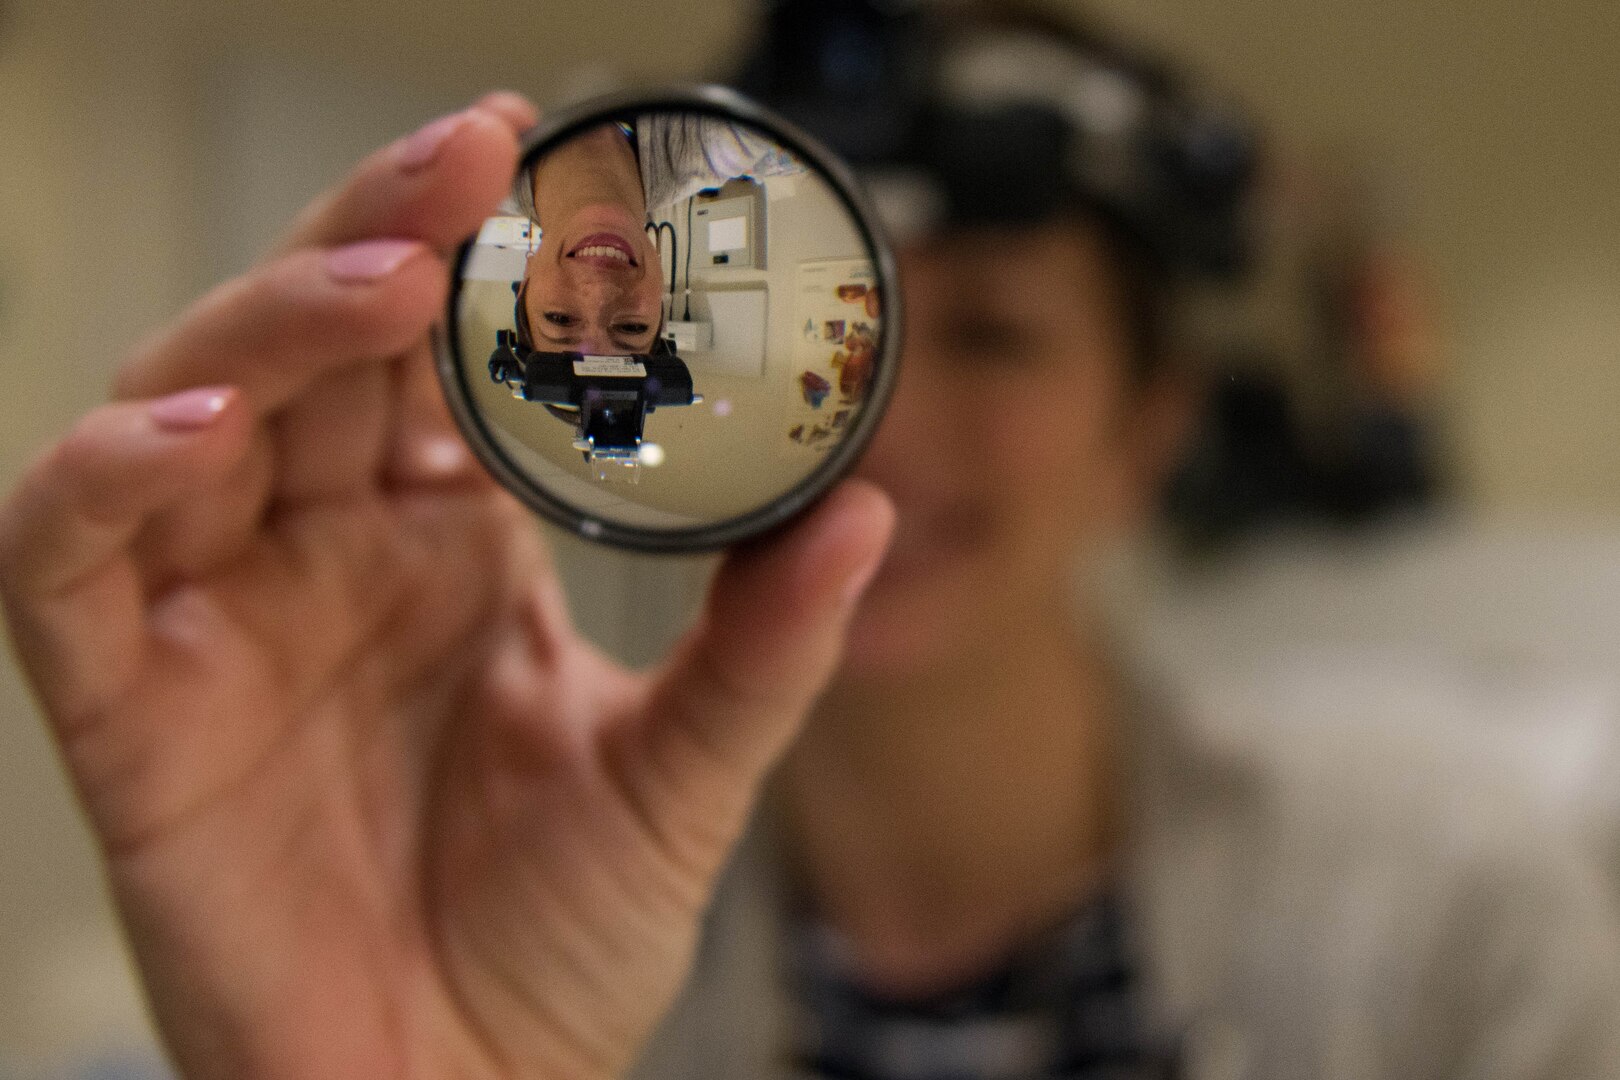 Dr. Courtney Humphrey, an optometrist with the 633rd Aerospace Medicine Squadron, holds a lens used to look into a patient's eye at Joint Base Langley-Eustis, Va., Jan. 27, 2020. (Photo Credit: Airman 1st Class Sarah Dowe)